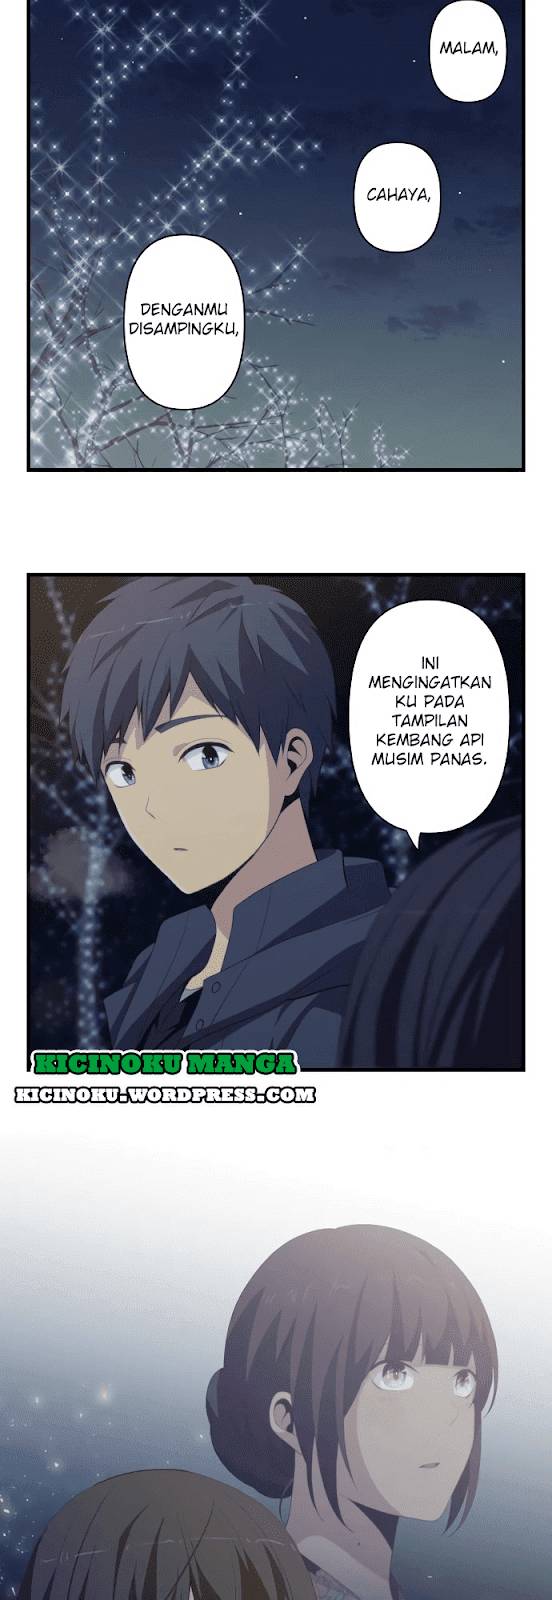 ReLife Chapter 197